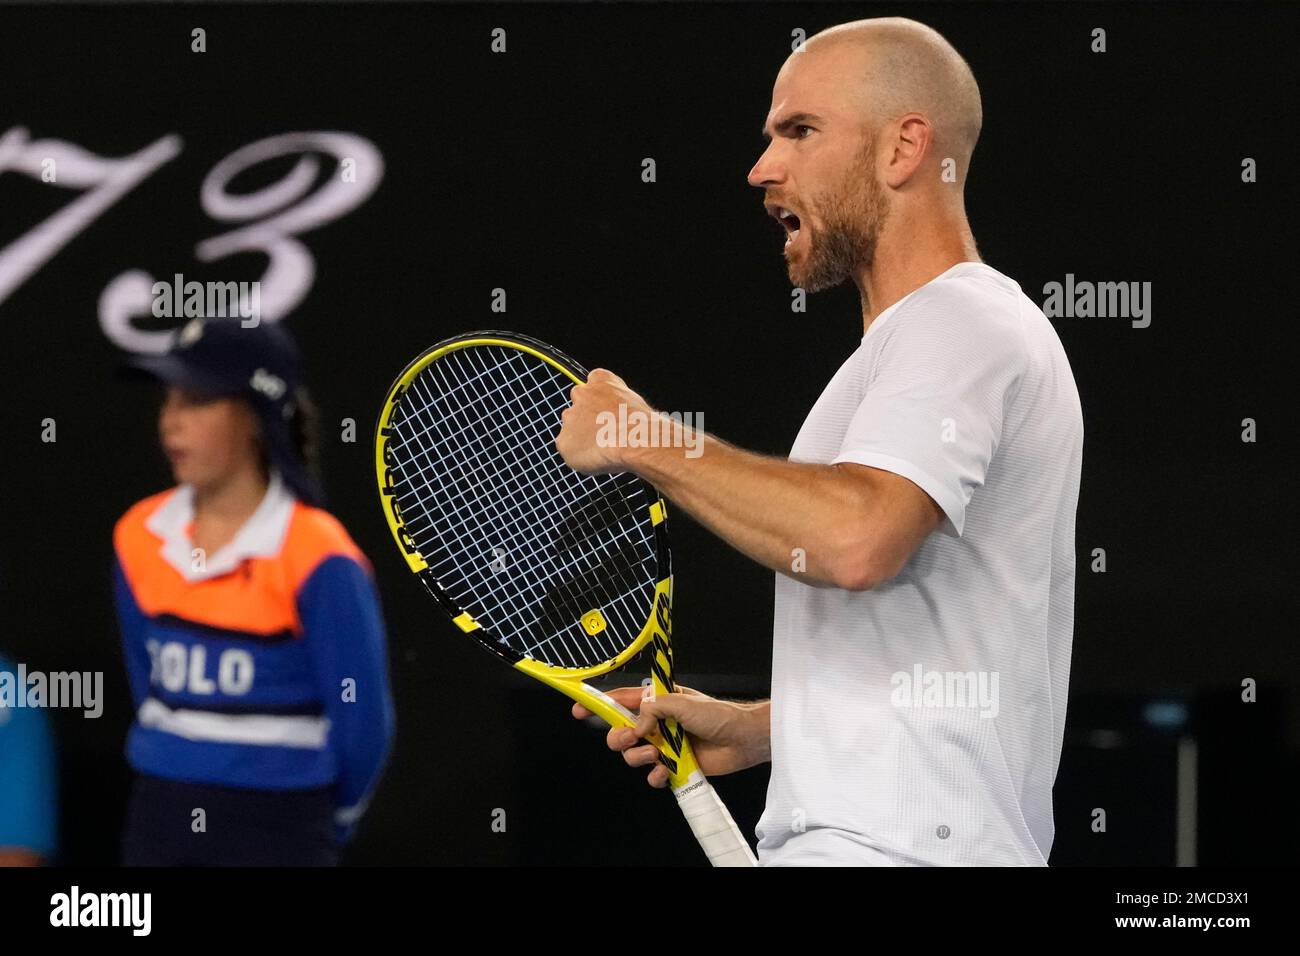 Aslan Karatsev of Russia reacts after winning a point against Adrian Mannarino of France during their third round match at the Australian Open tennis championships in Melbourne, Australia, Saturday, Jan